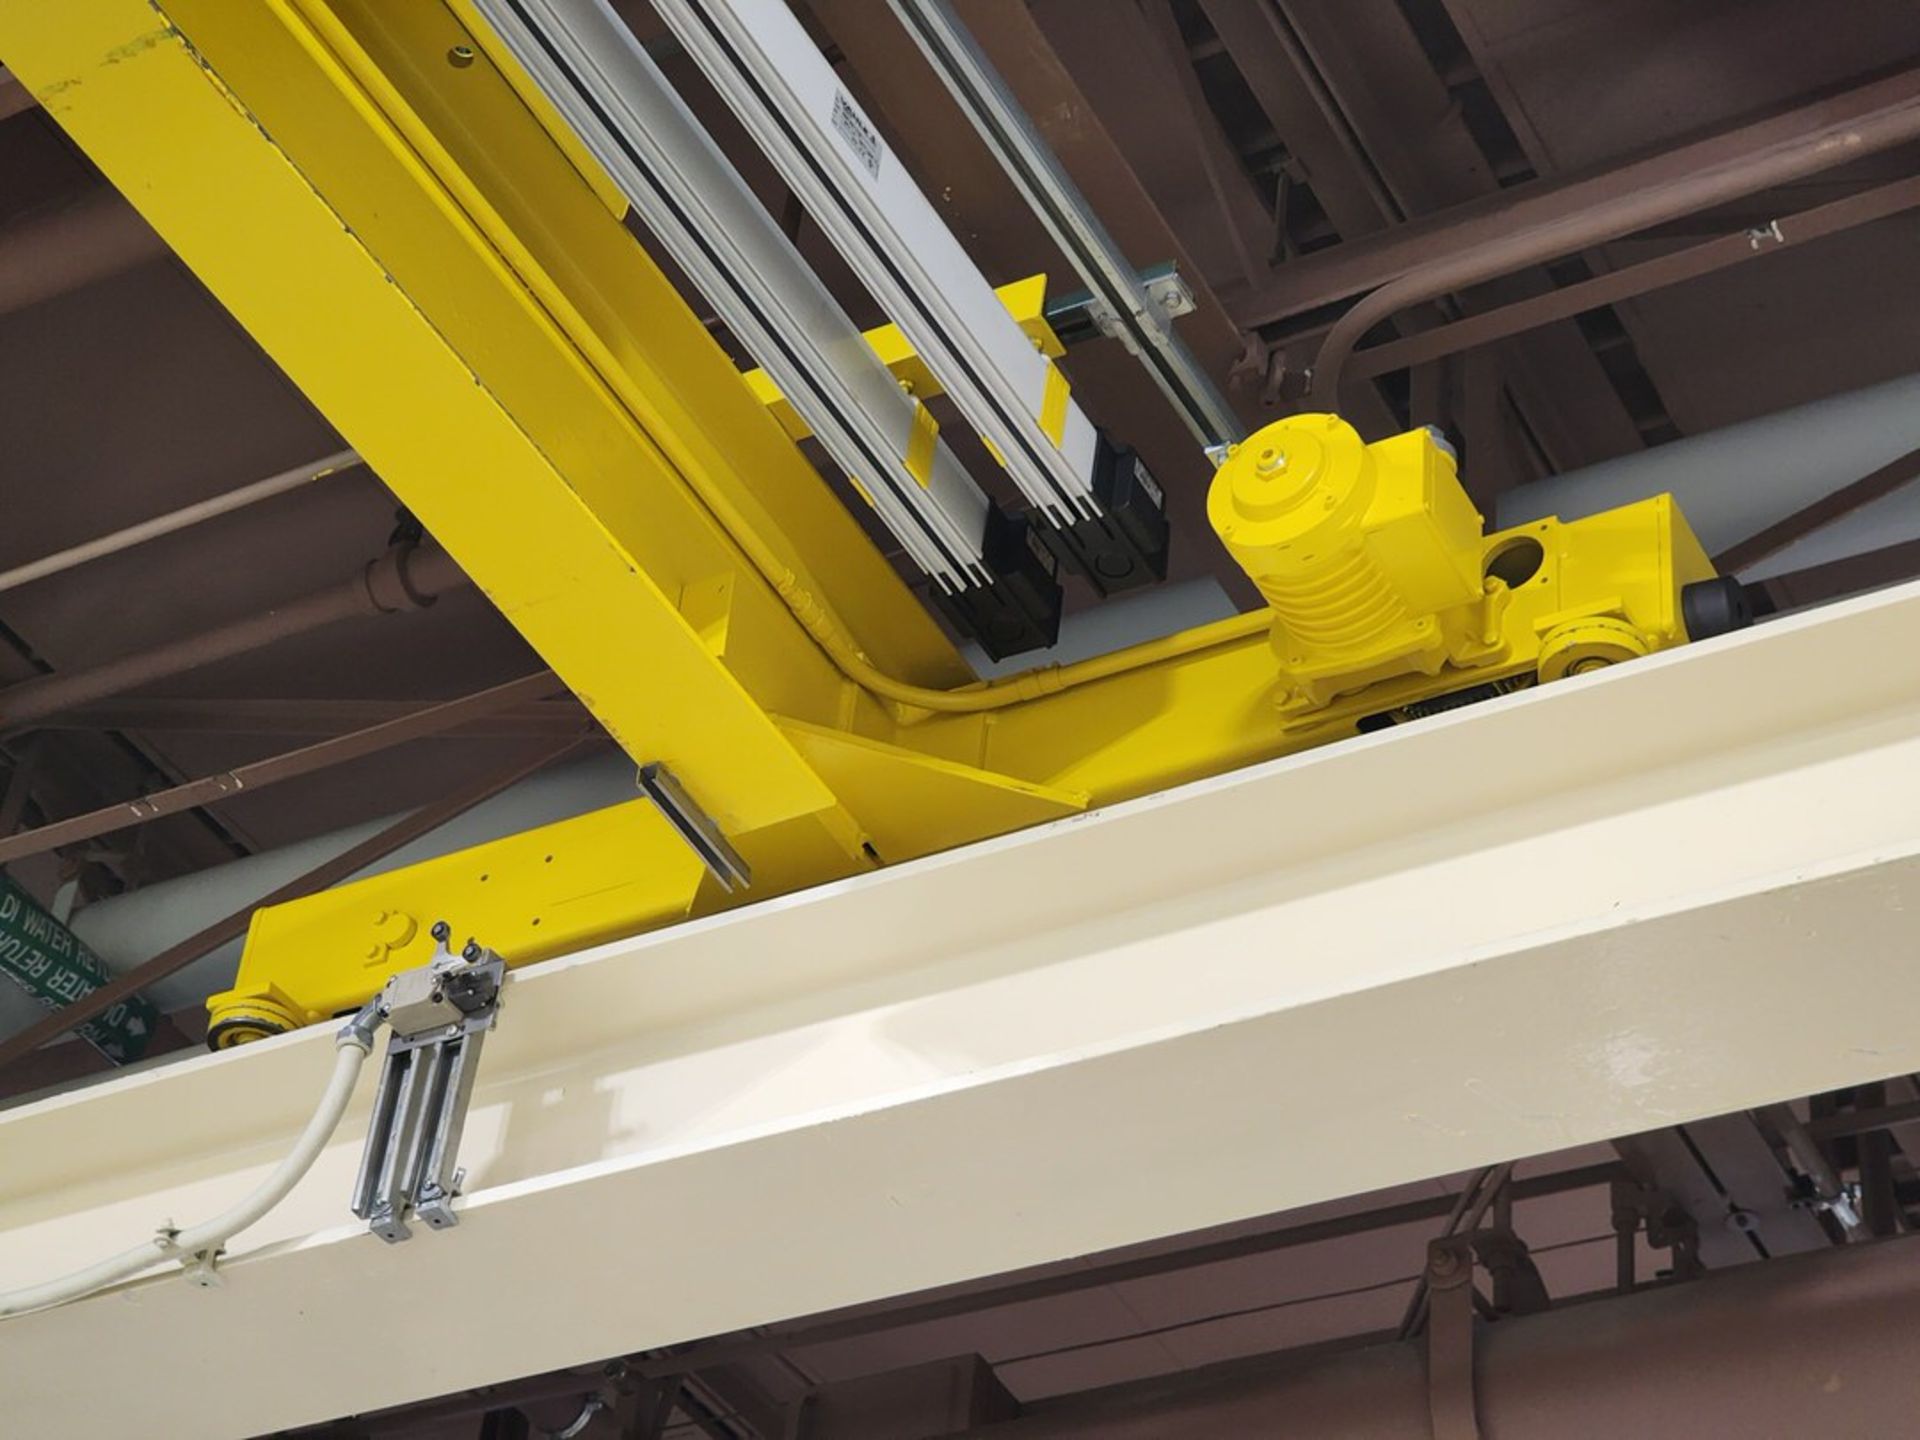 Industrial Handling Systems 4-Post 2 Ton Overhead Crane 28' x 24-1/2' x 11-1/2'H (Location: Machine - Image 11 of 14